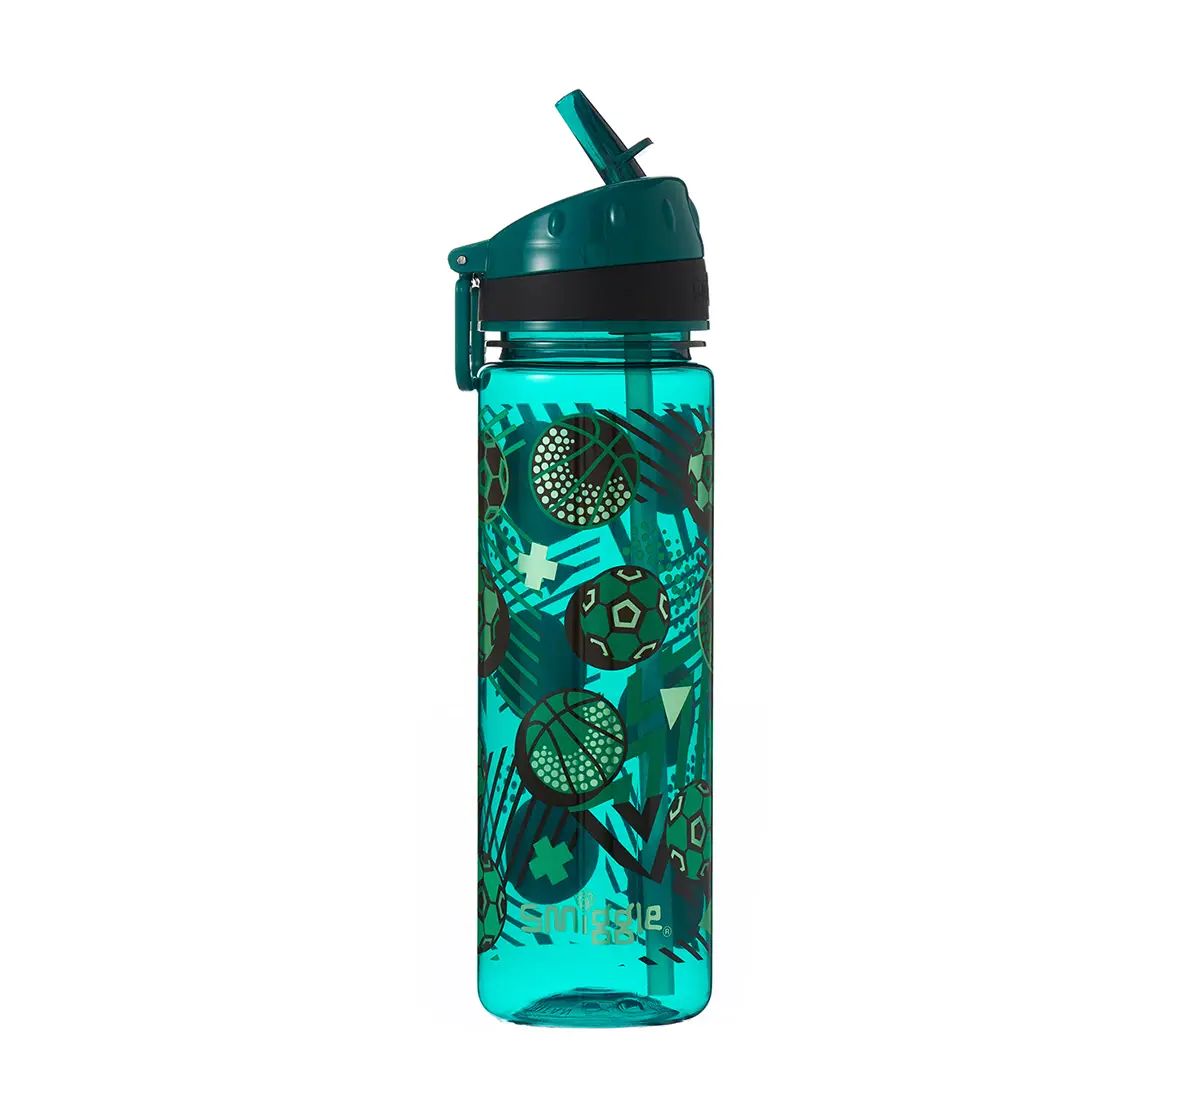 Smiggle Flow Drink Bottle with Flip Top Spout Football Print Bags for Kids age 3Y+ (Green)